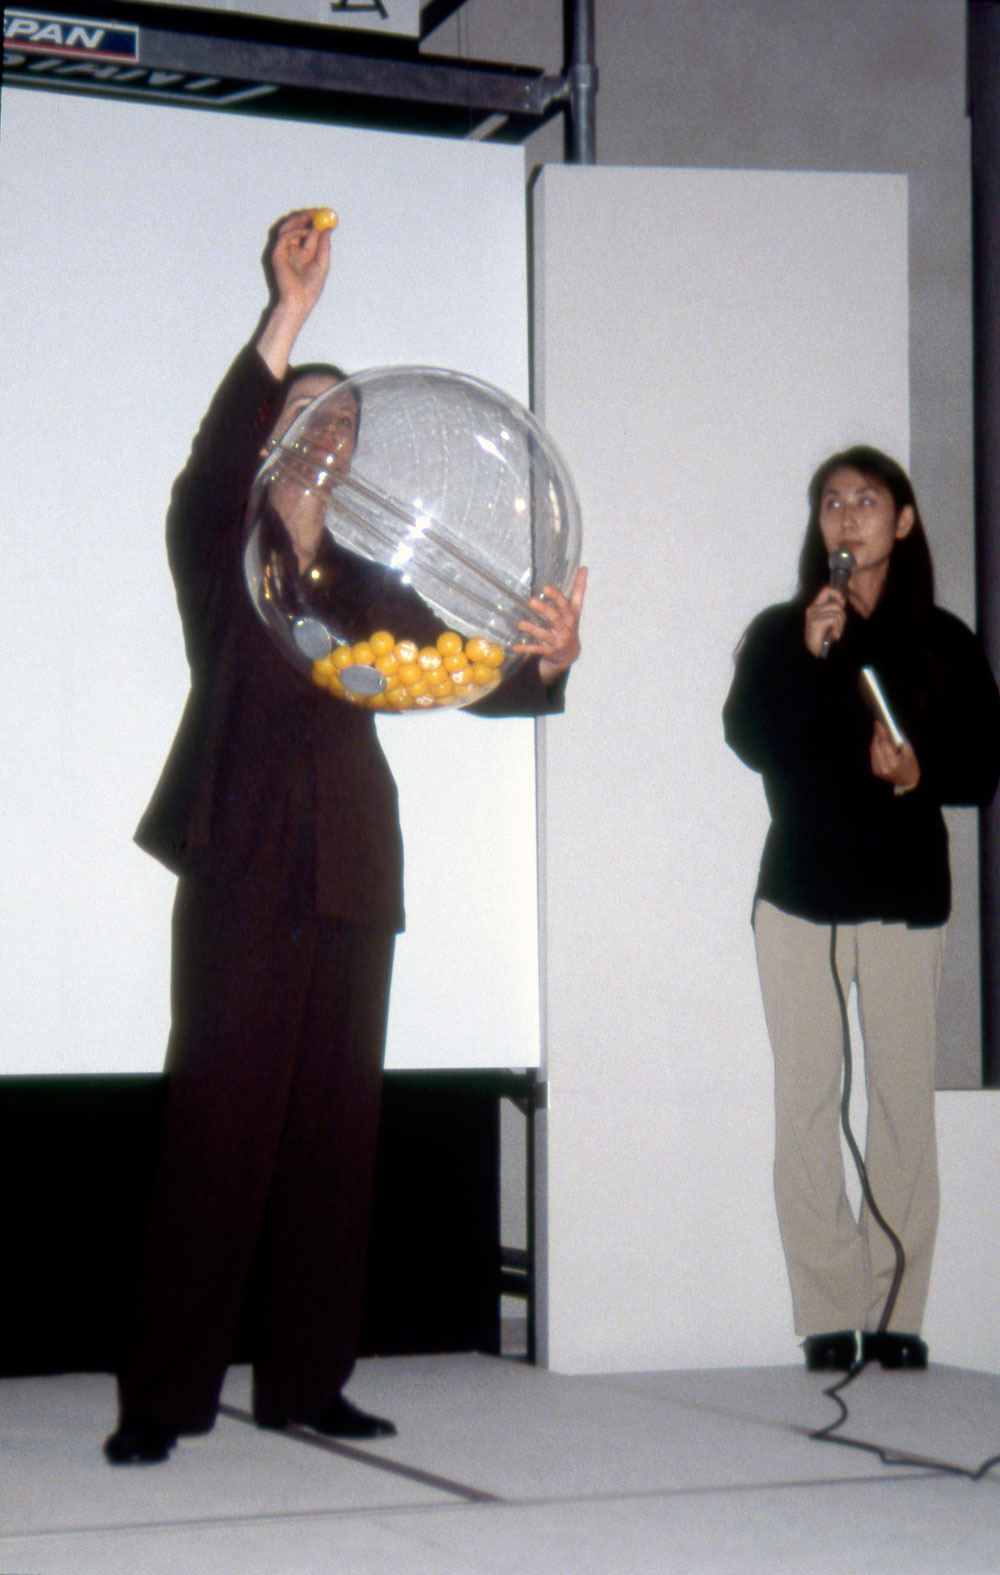 Art, artwork. A performance entitled "Nika's Game of Chance" by Nika Span / Nika Špan. Material: 49 numbered table tennis balls, a Plexiglas sphere, a fan, 20 copies of a lottery ticket, a female assistant. Exhibition: Academy Exchange, School of Art and Design, Seoul, Korea; Tokyo Geijutsu, Tokyo, Japan.